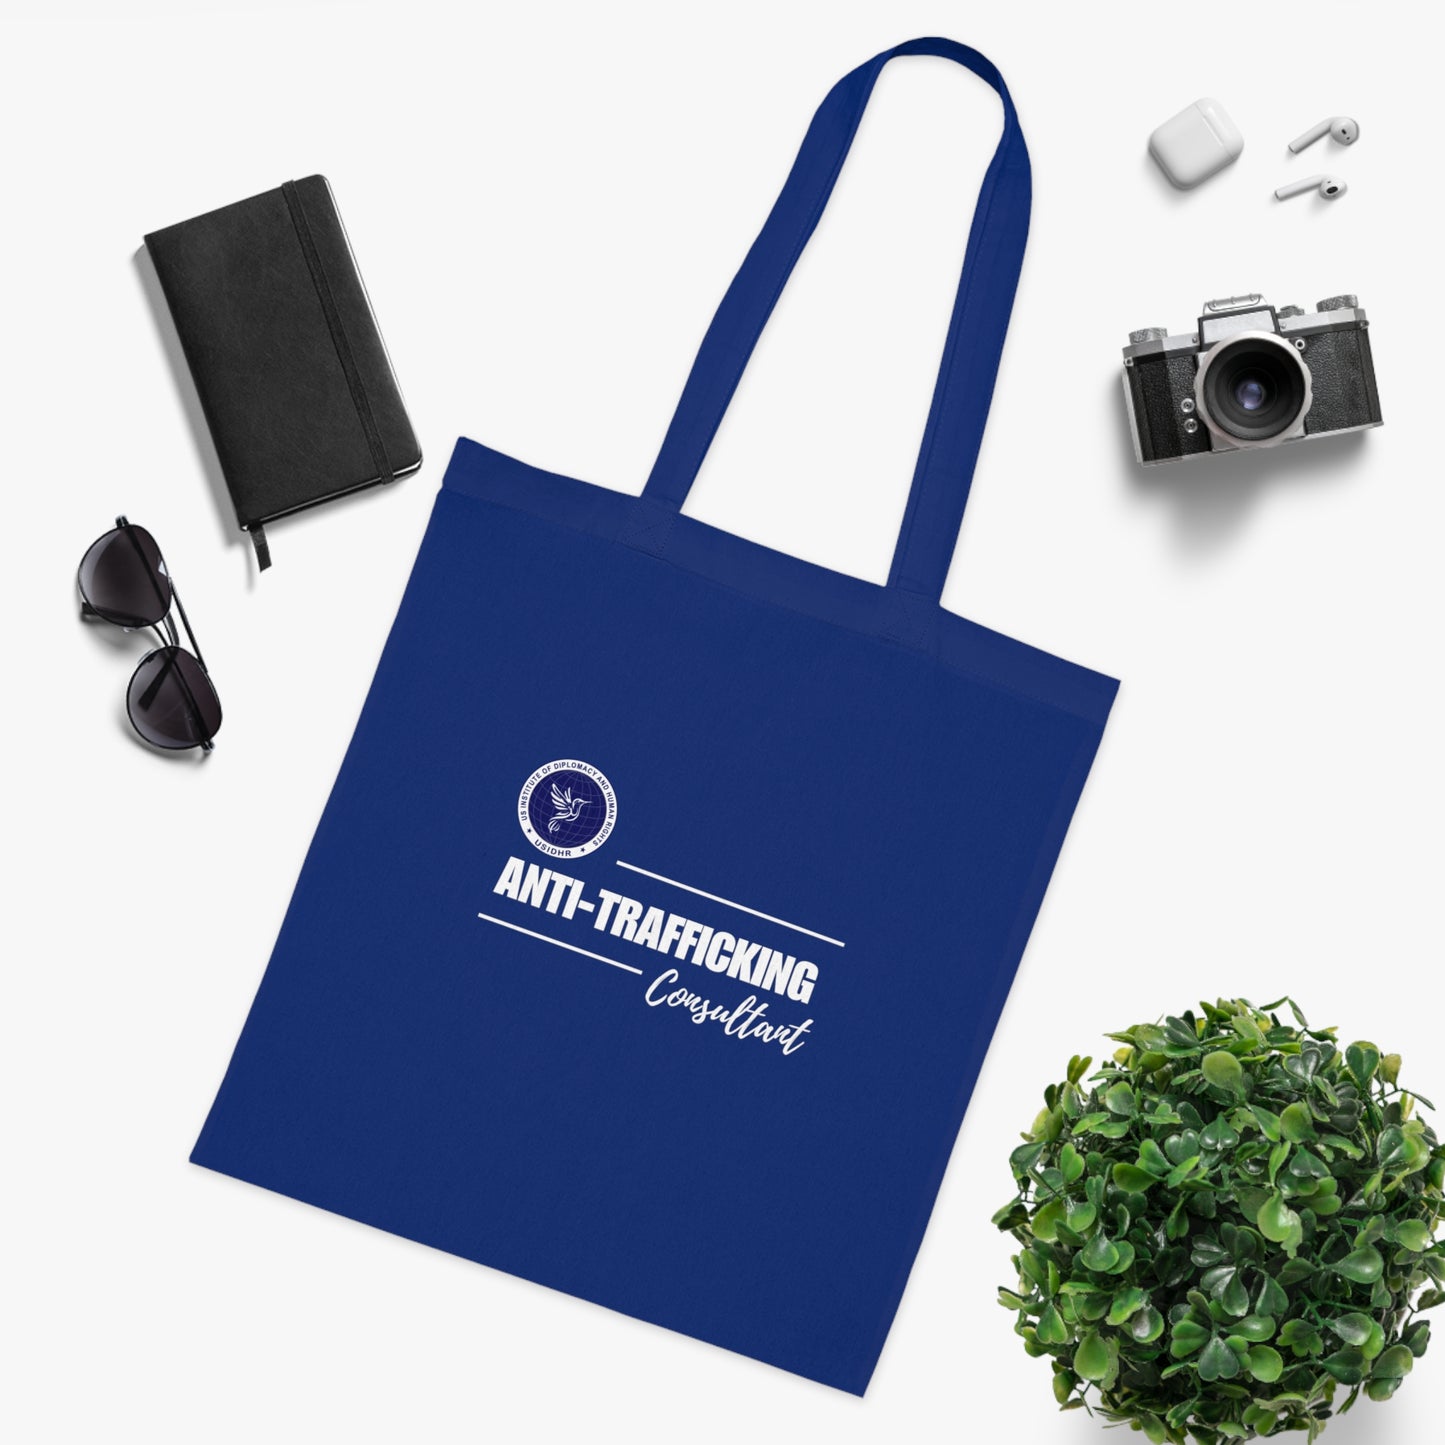 Anti-trafficking Consultant Tote Bag